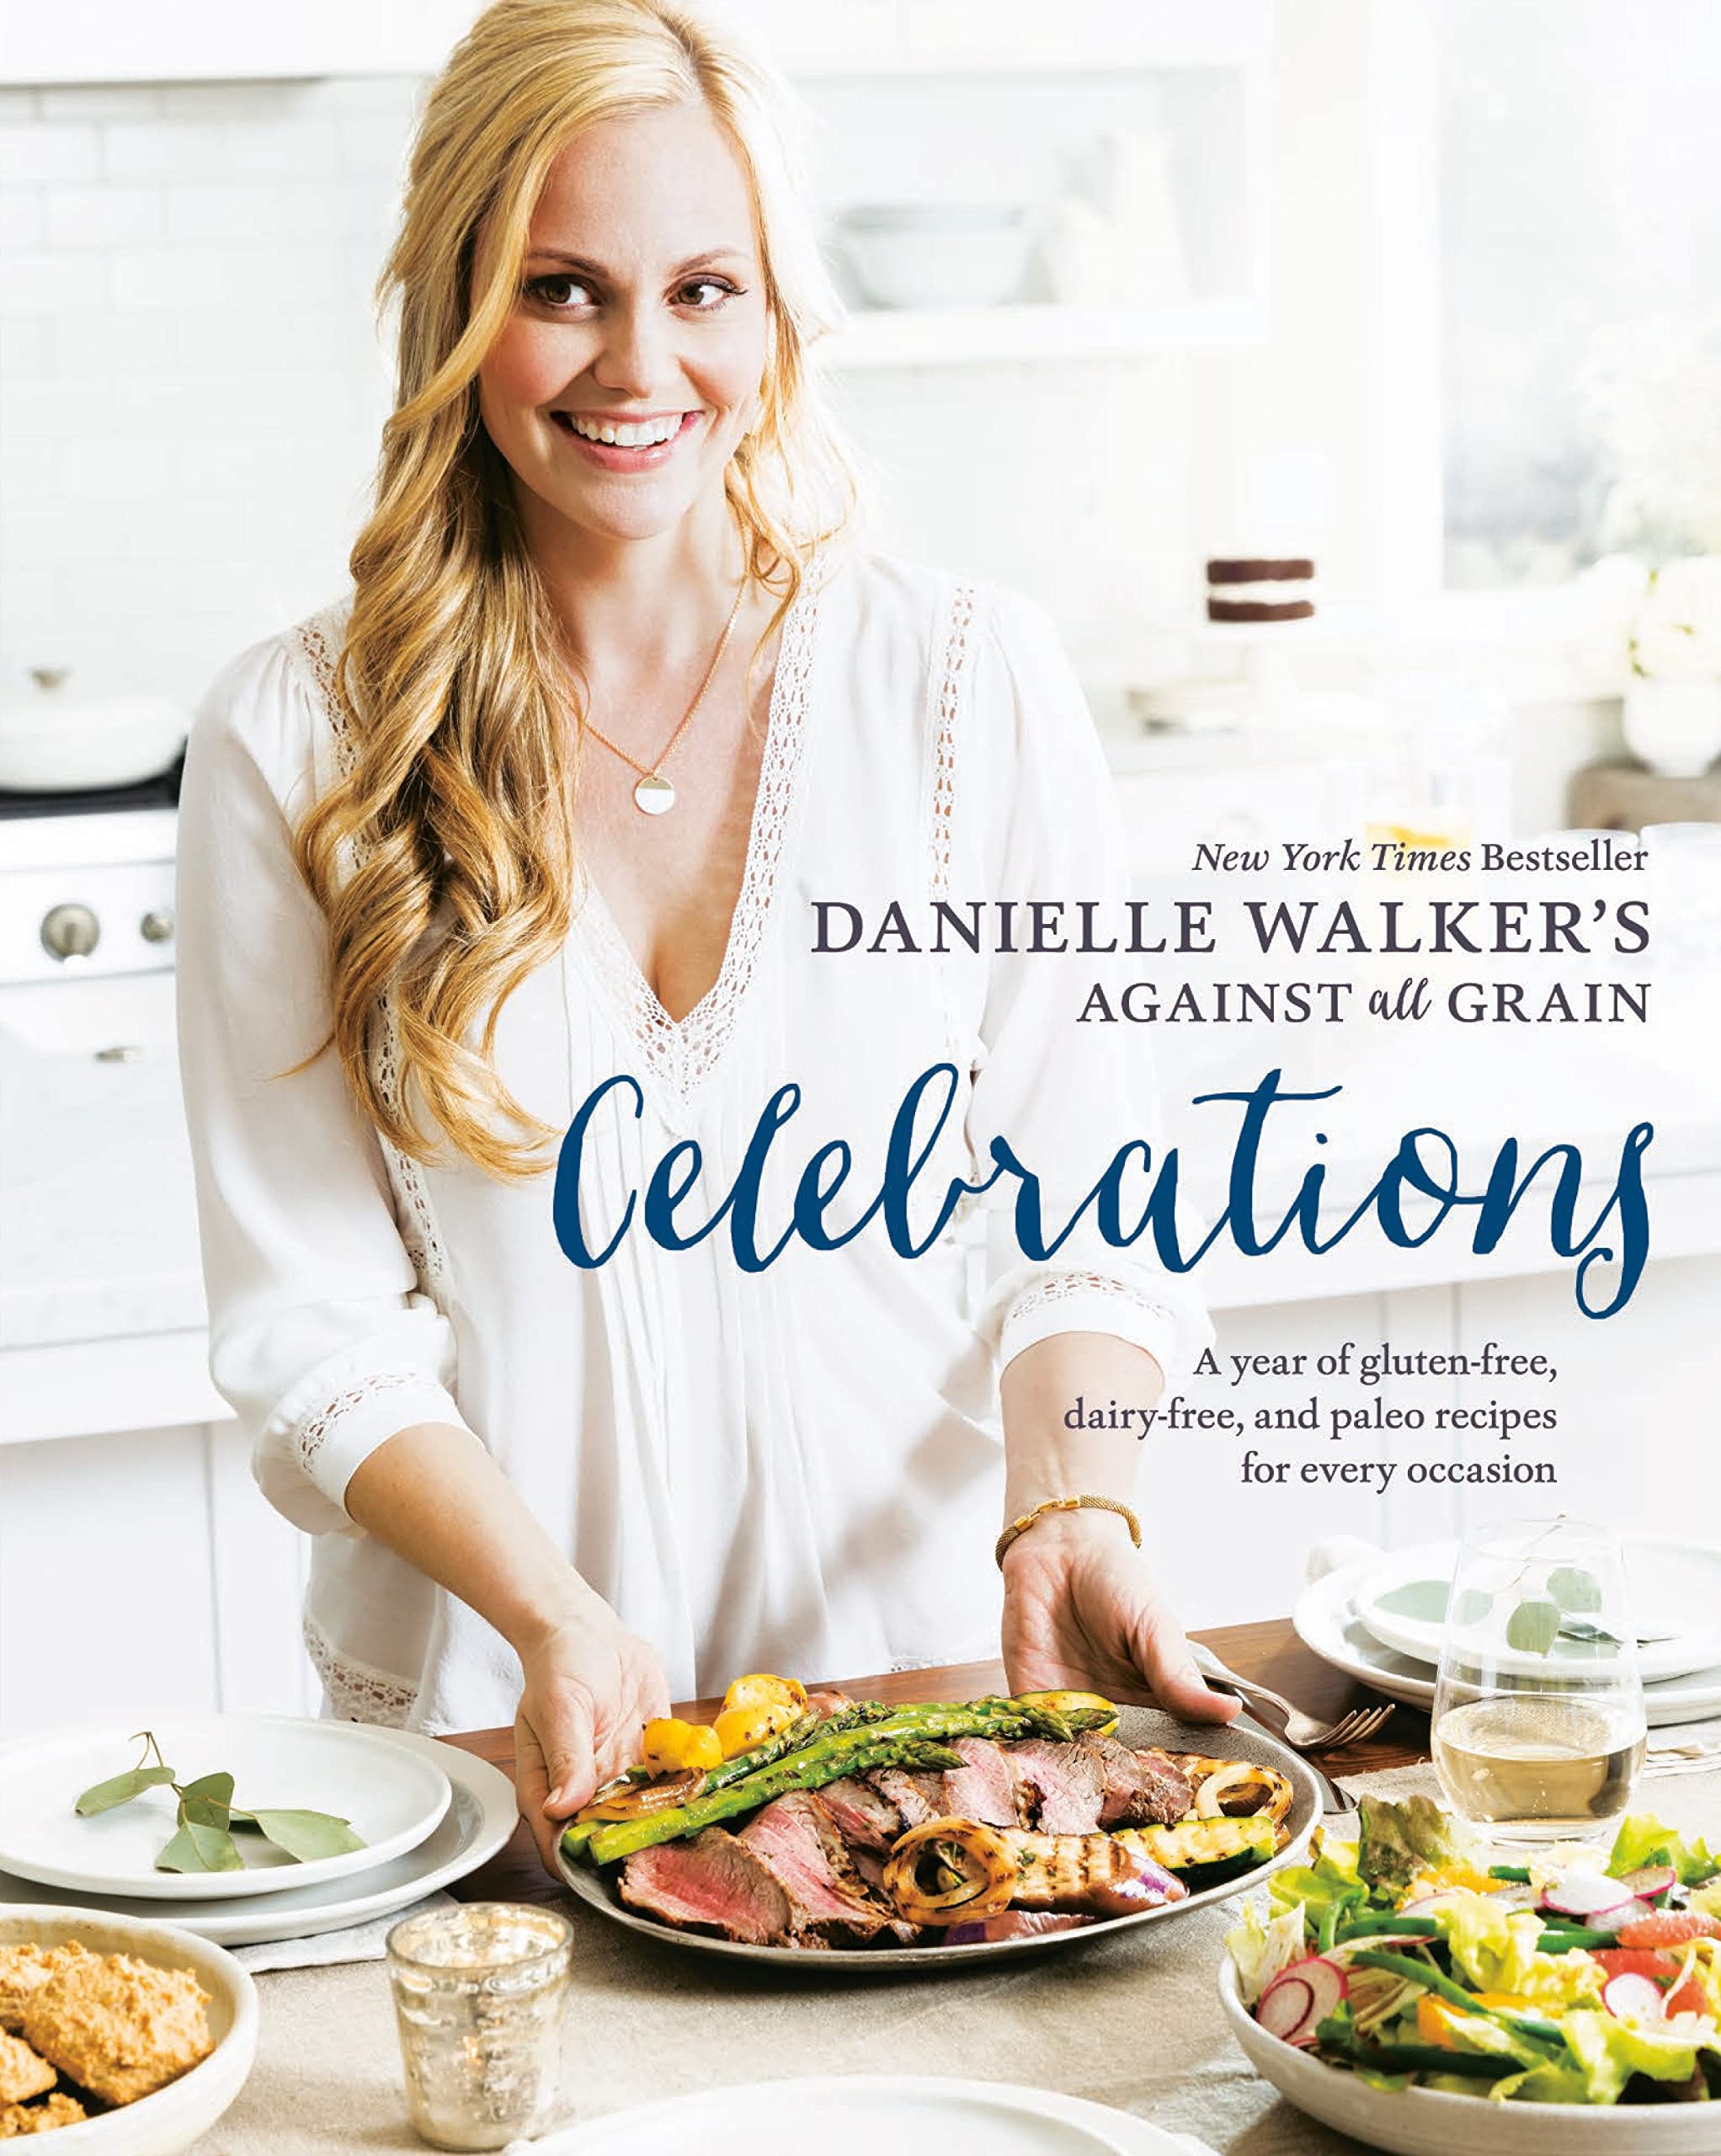 Danielle Walkers Against All Grain Celebrations A Year of Gluten-Free, Dairy-Free, and Paleo Recipes for Every Occasion A Cookbook